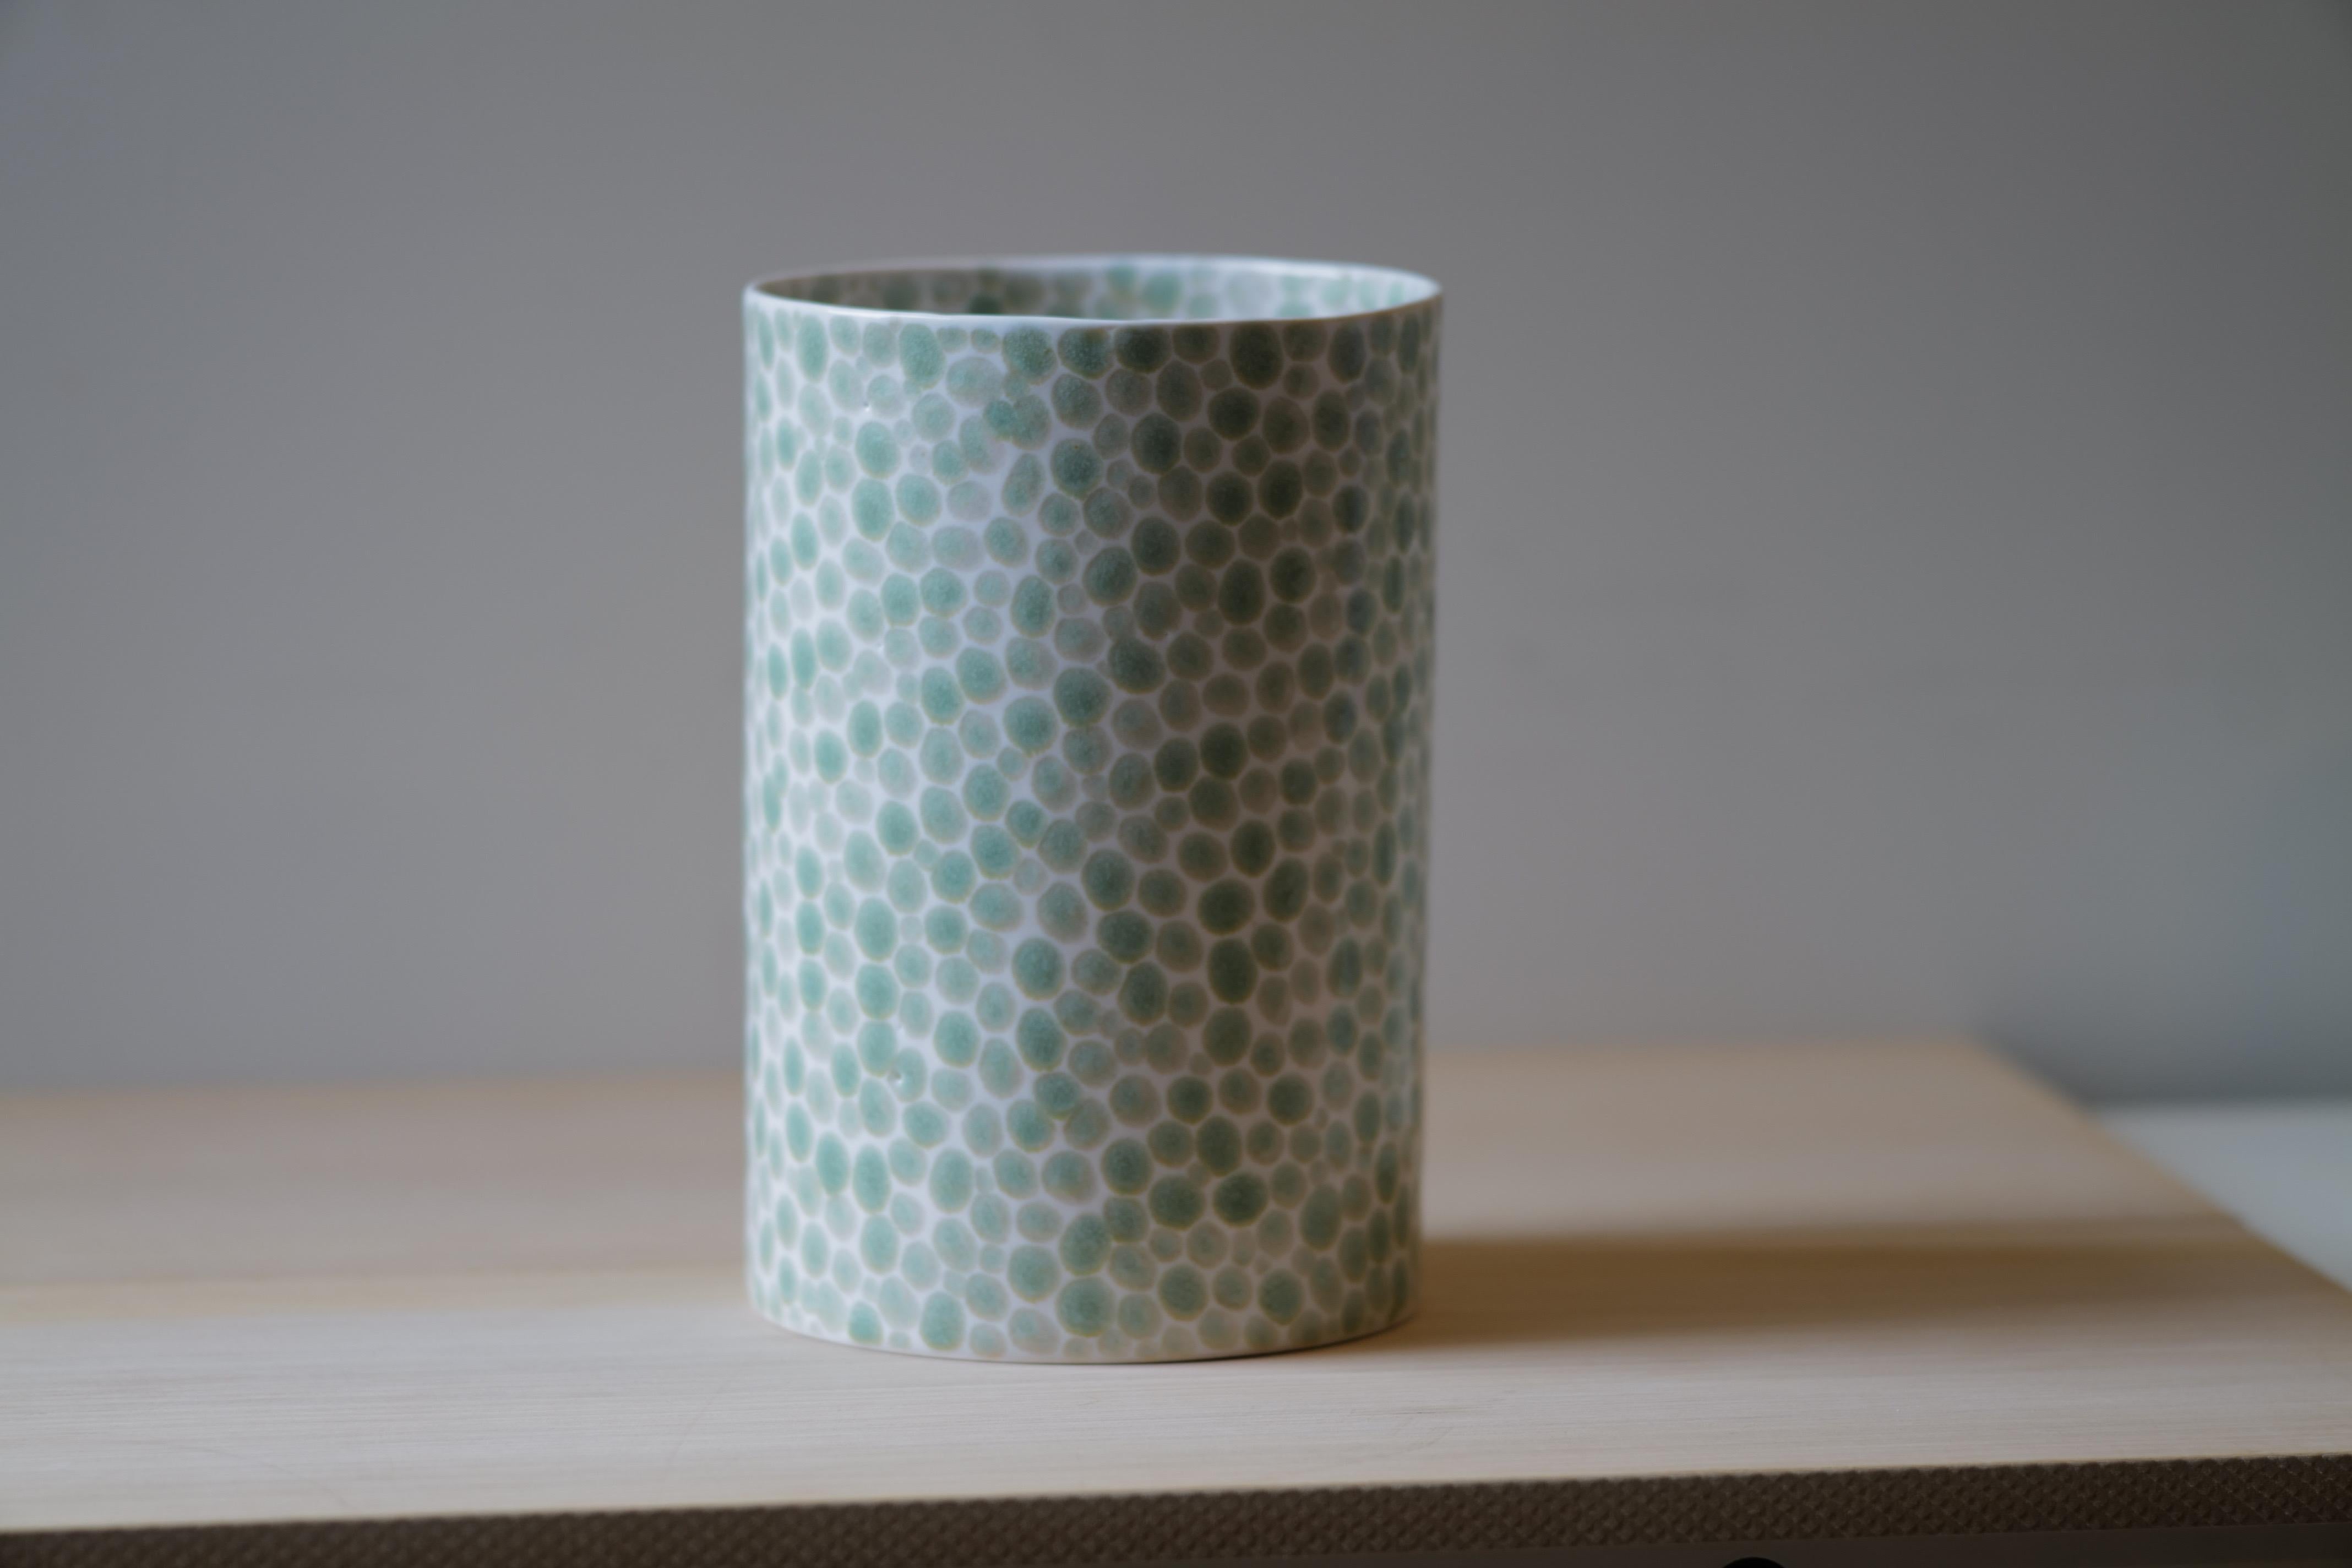 This porcelain large vase was made in NYC by artist Lana Kova. It is slip casted in mold and then fired hand painted and fired again. It is very precise in its painting of dot pattern and thin for its size. This piece makes a beautiful addition to